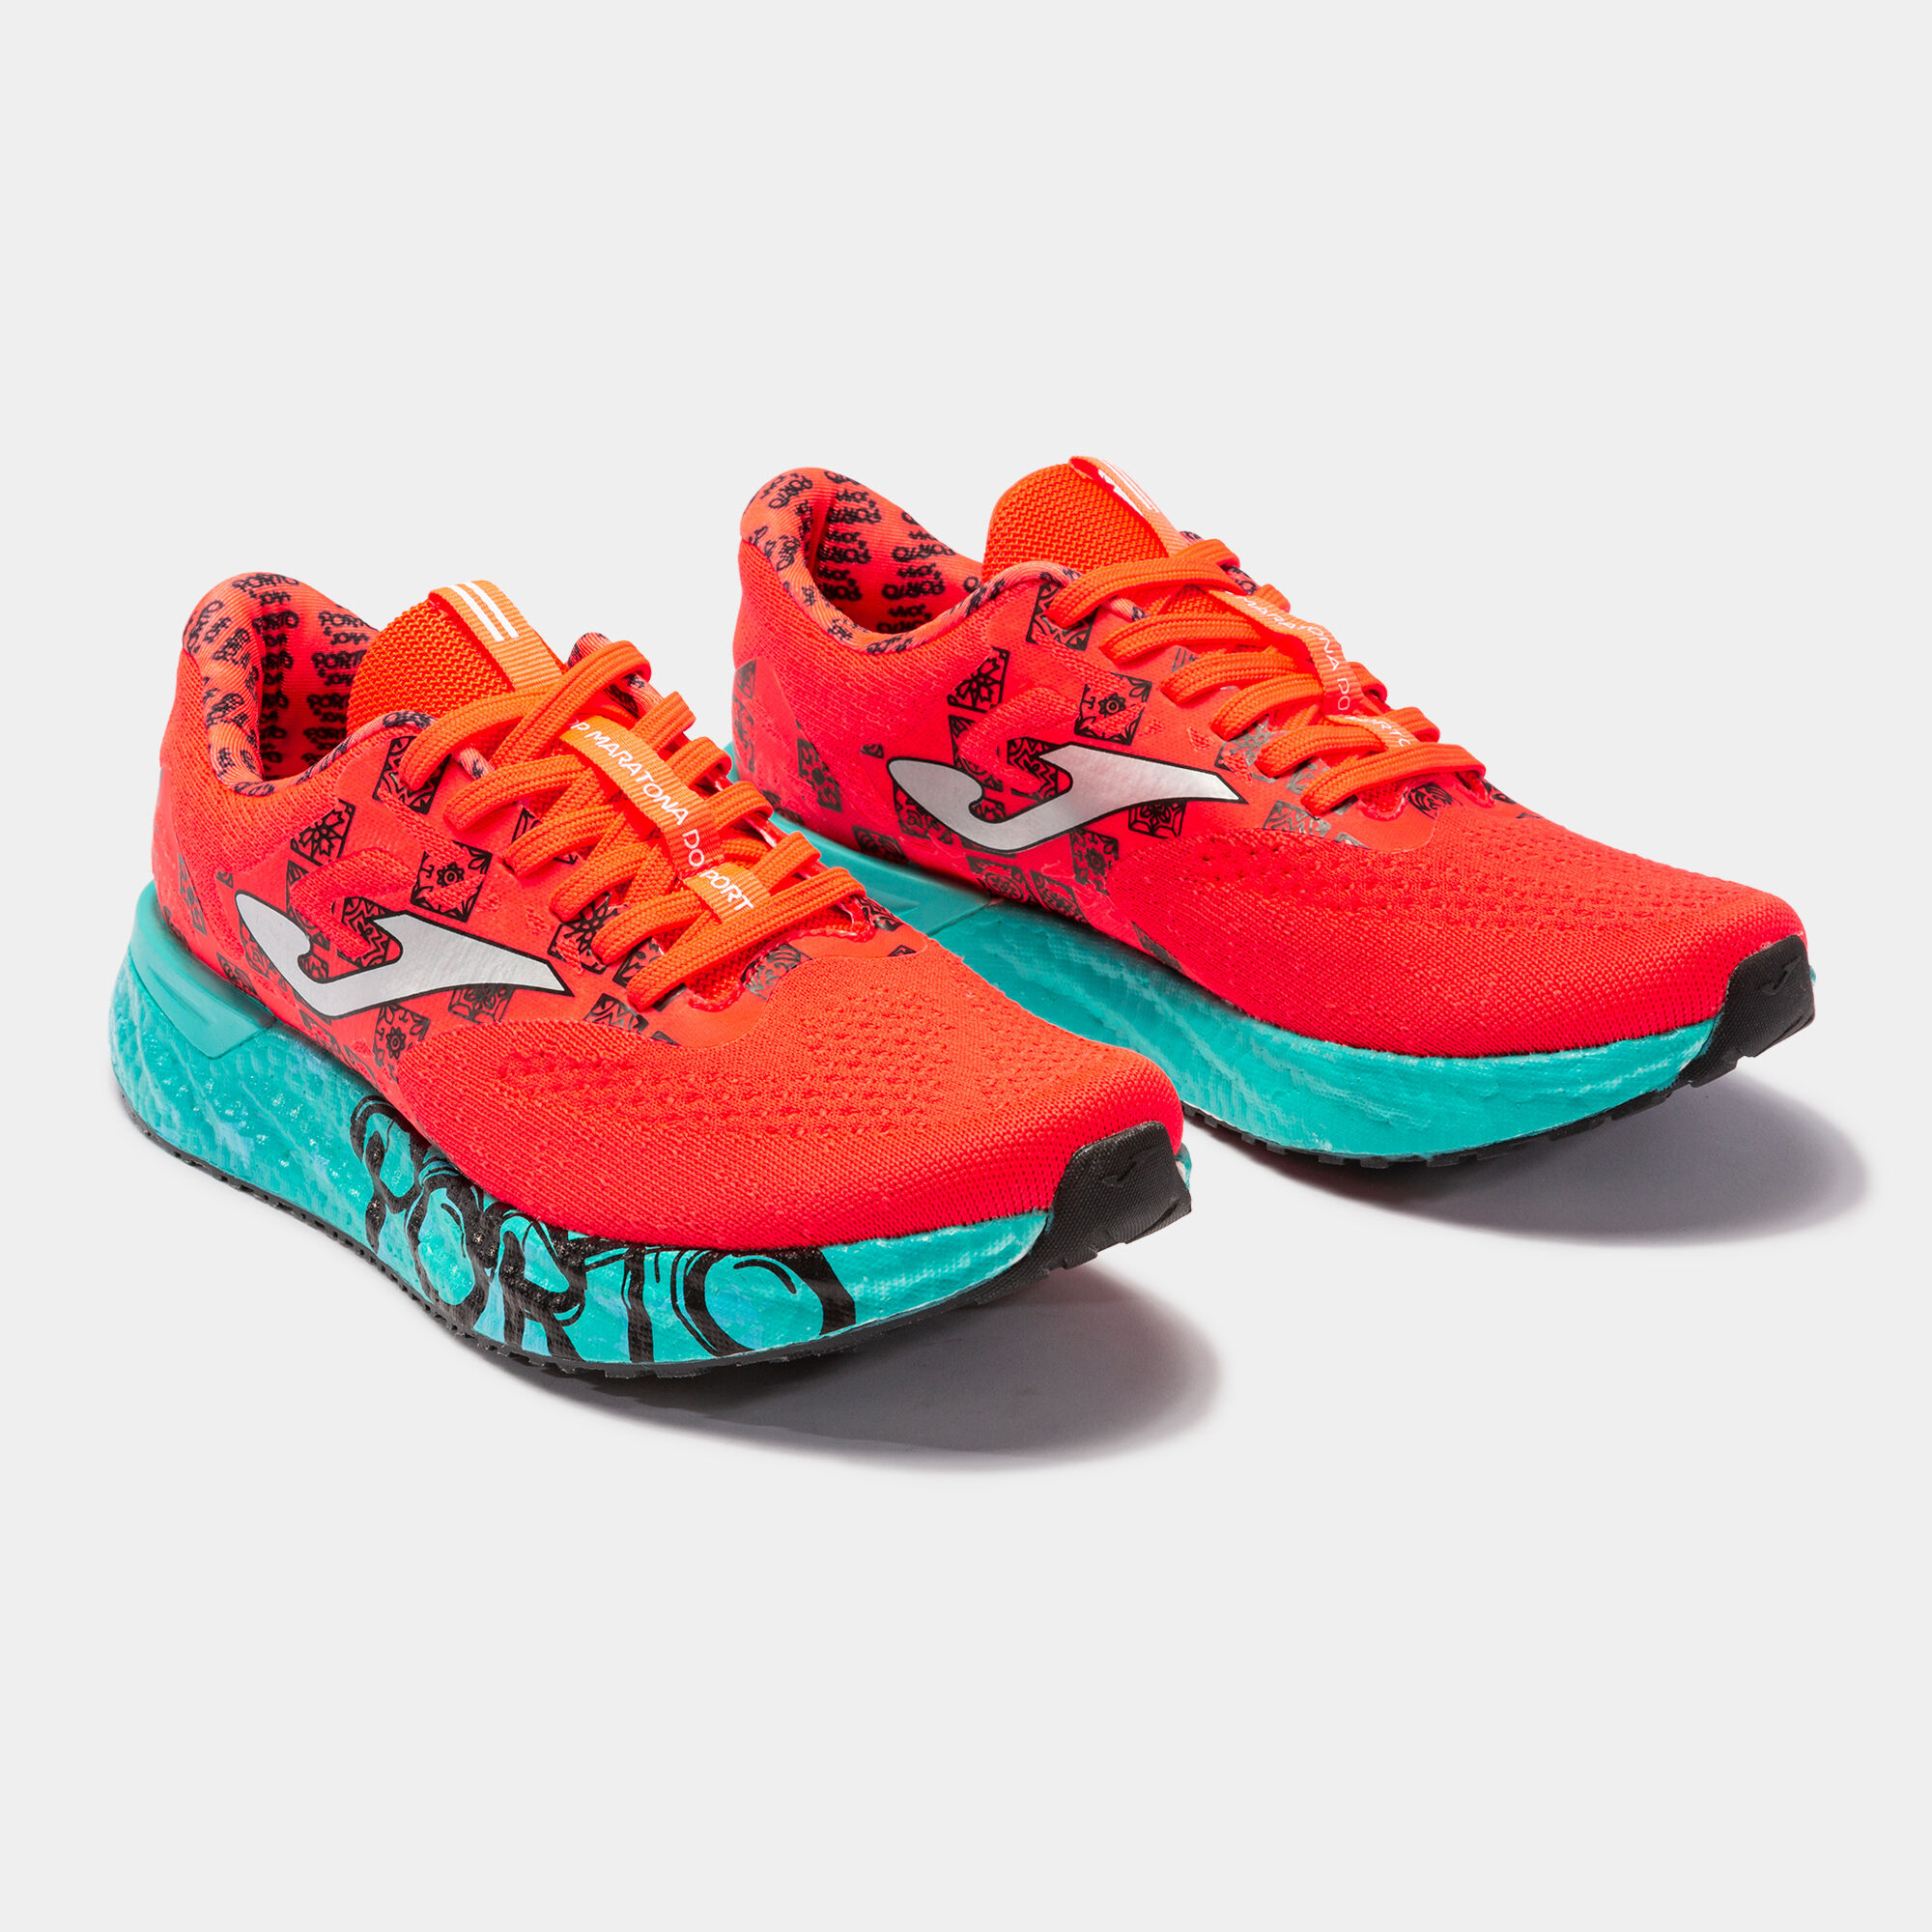 RUNNING SHOES STORM VIPER OPORTO MARATHON MAN CORAL TURQUOISE